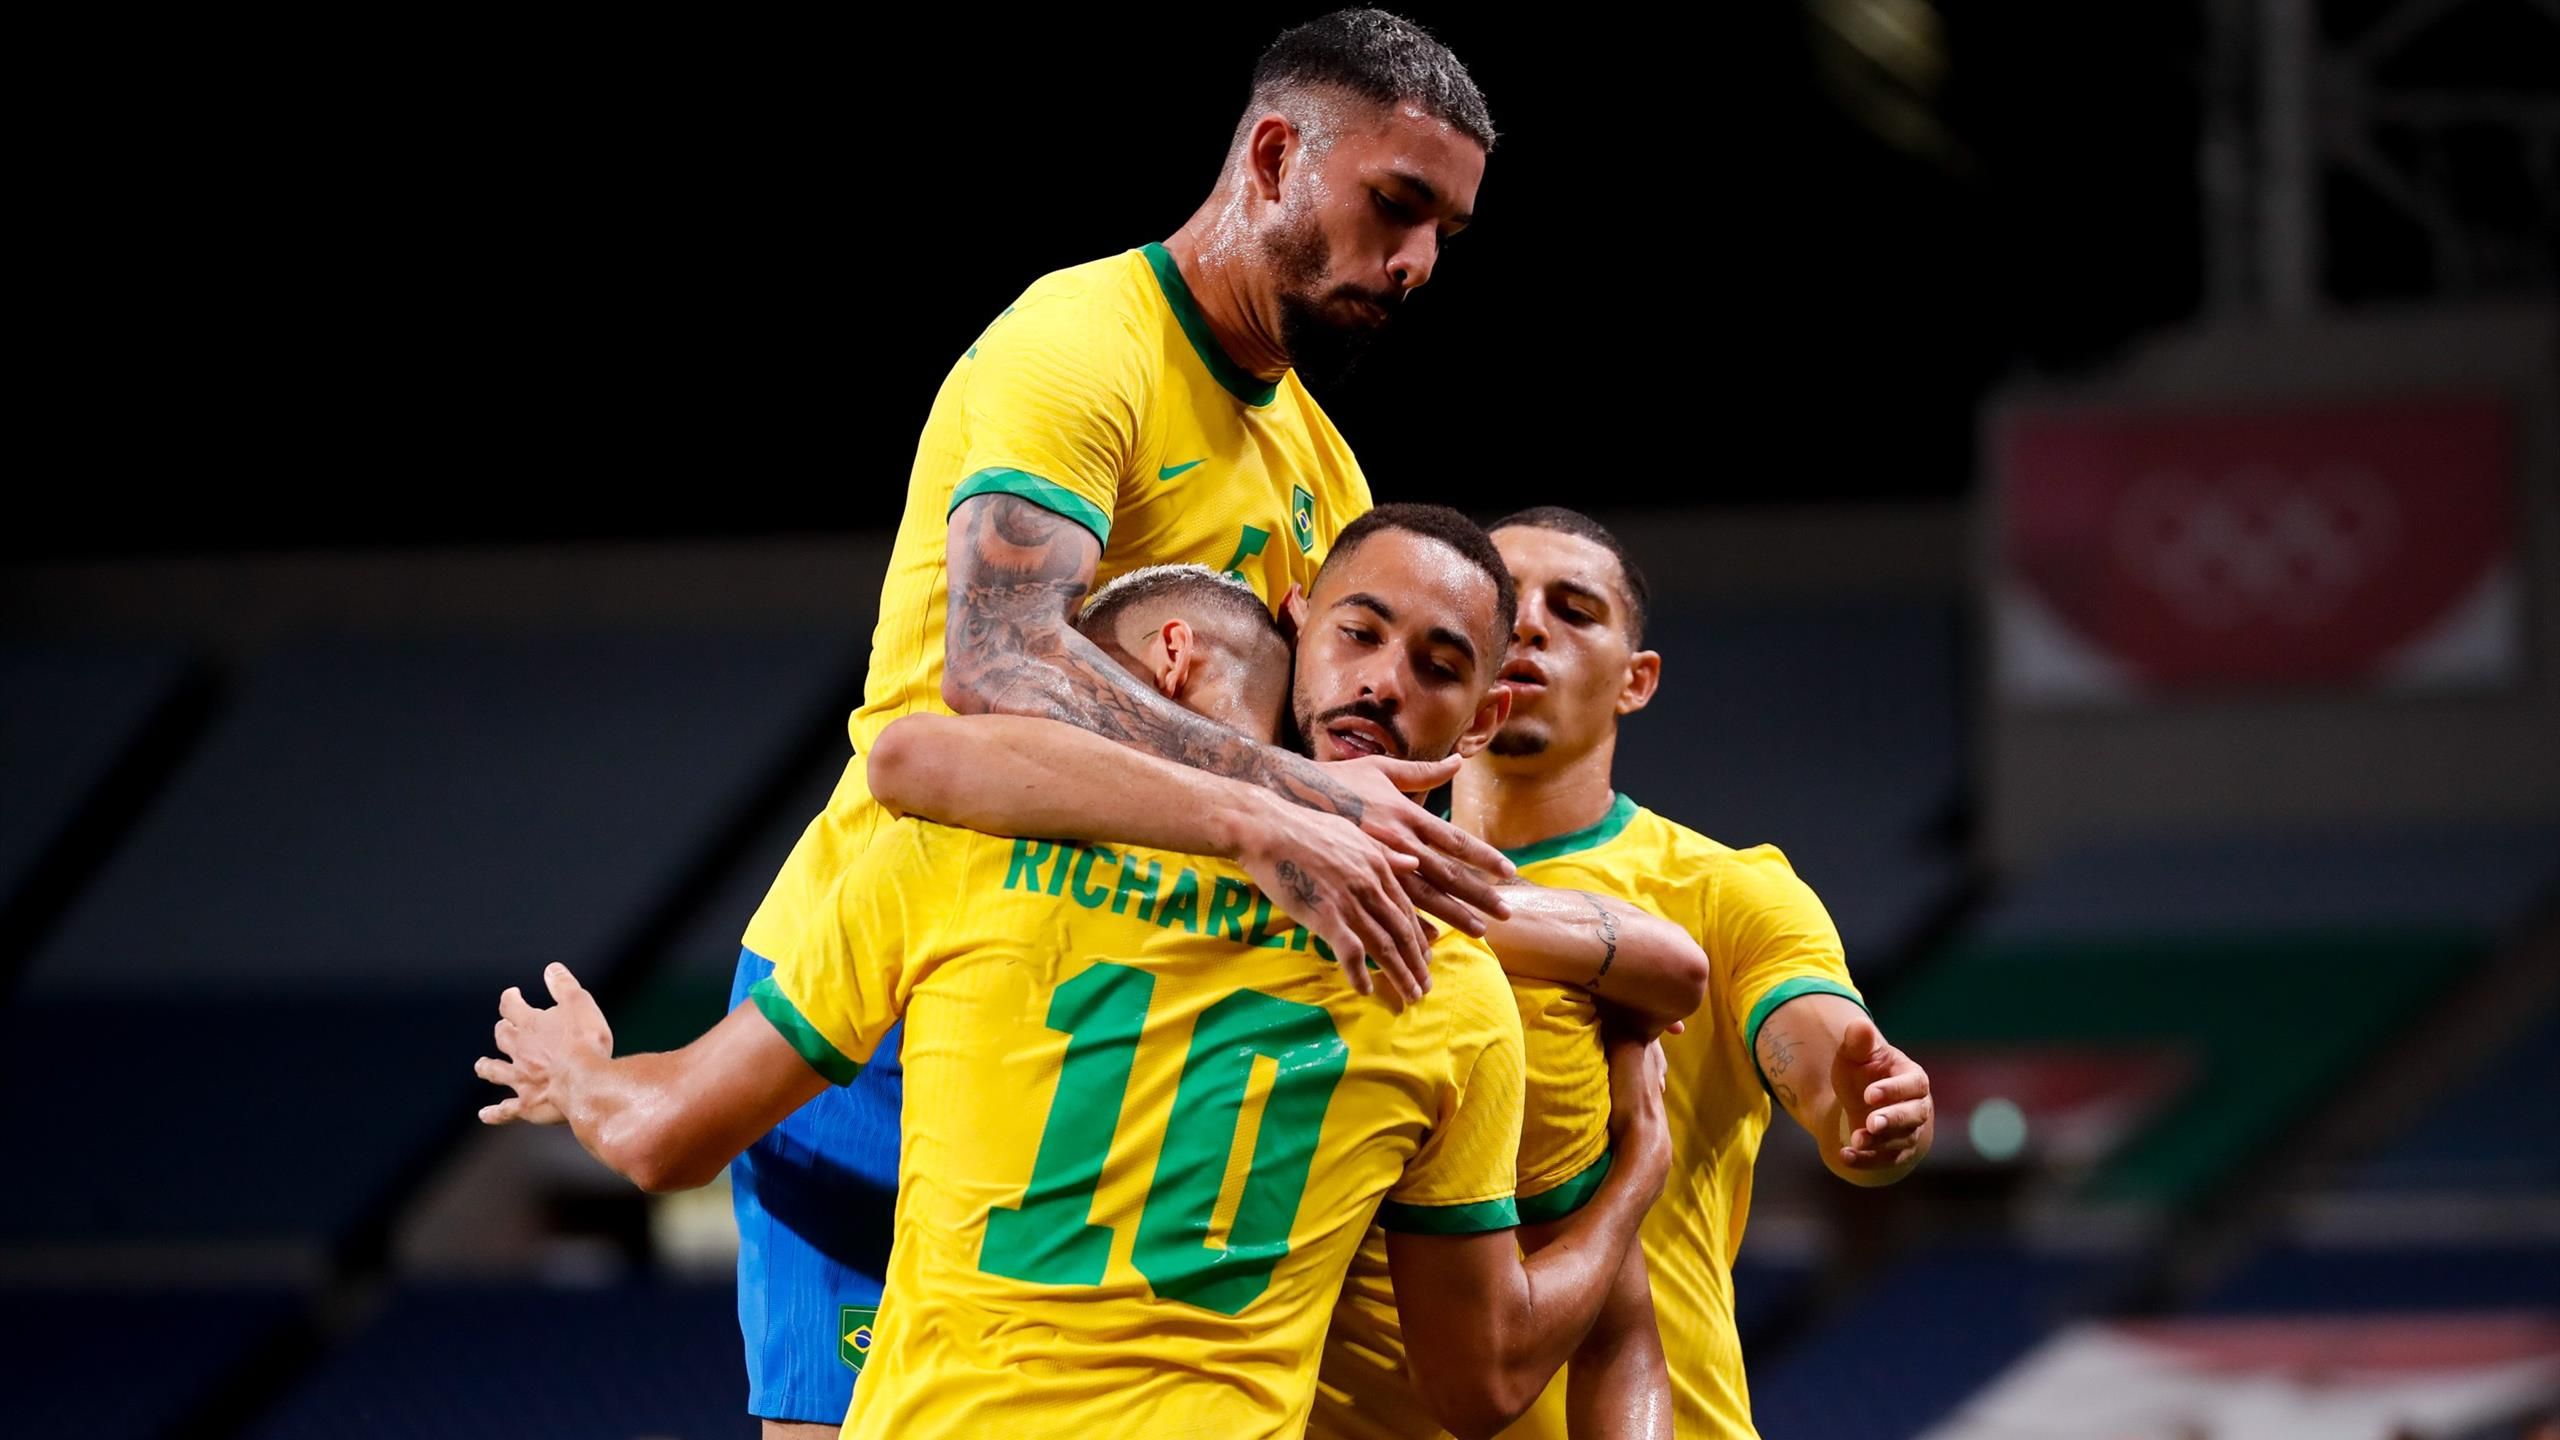 T'QUIO, TO - 03.08.2021: TOKYO 2020 OLYMPIAD TOKYO - Renier do Brasil  celebrates scoring decisive penalty during the Mexico-Brazil soccer game at  the Tokyo 2020 Olympic Games held in 2021, the game